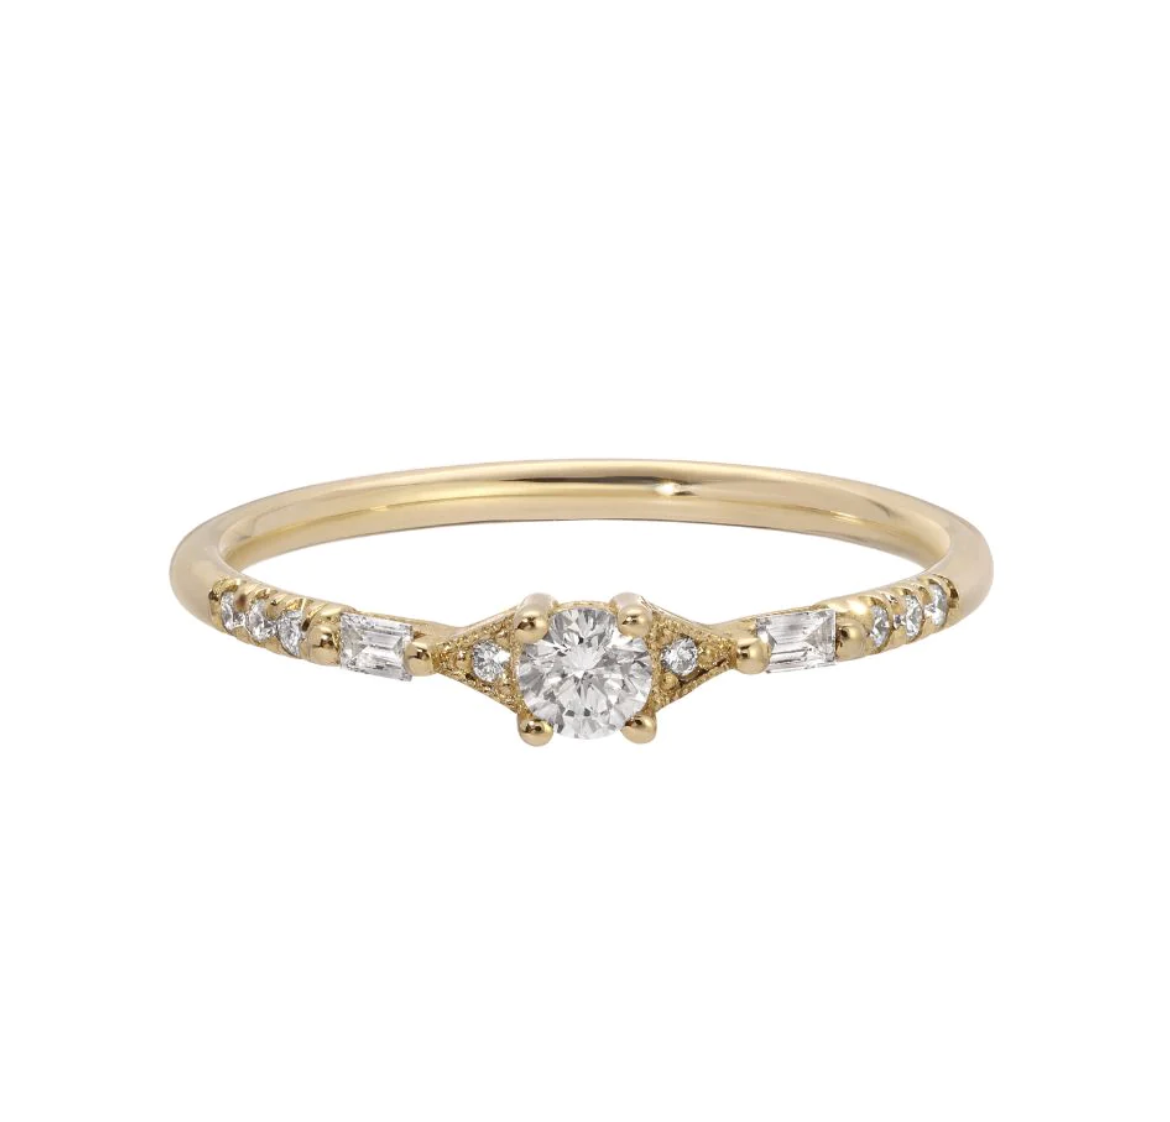 a gold diamond ring with round and baguette diamonds and delicate metal details on a white background